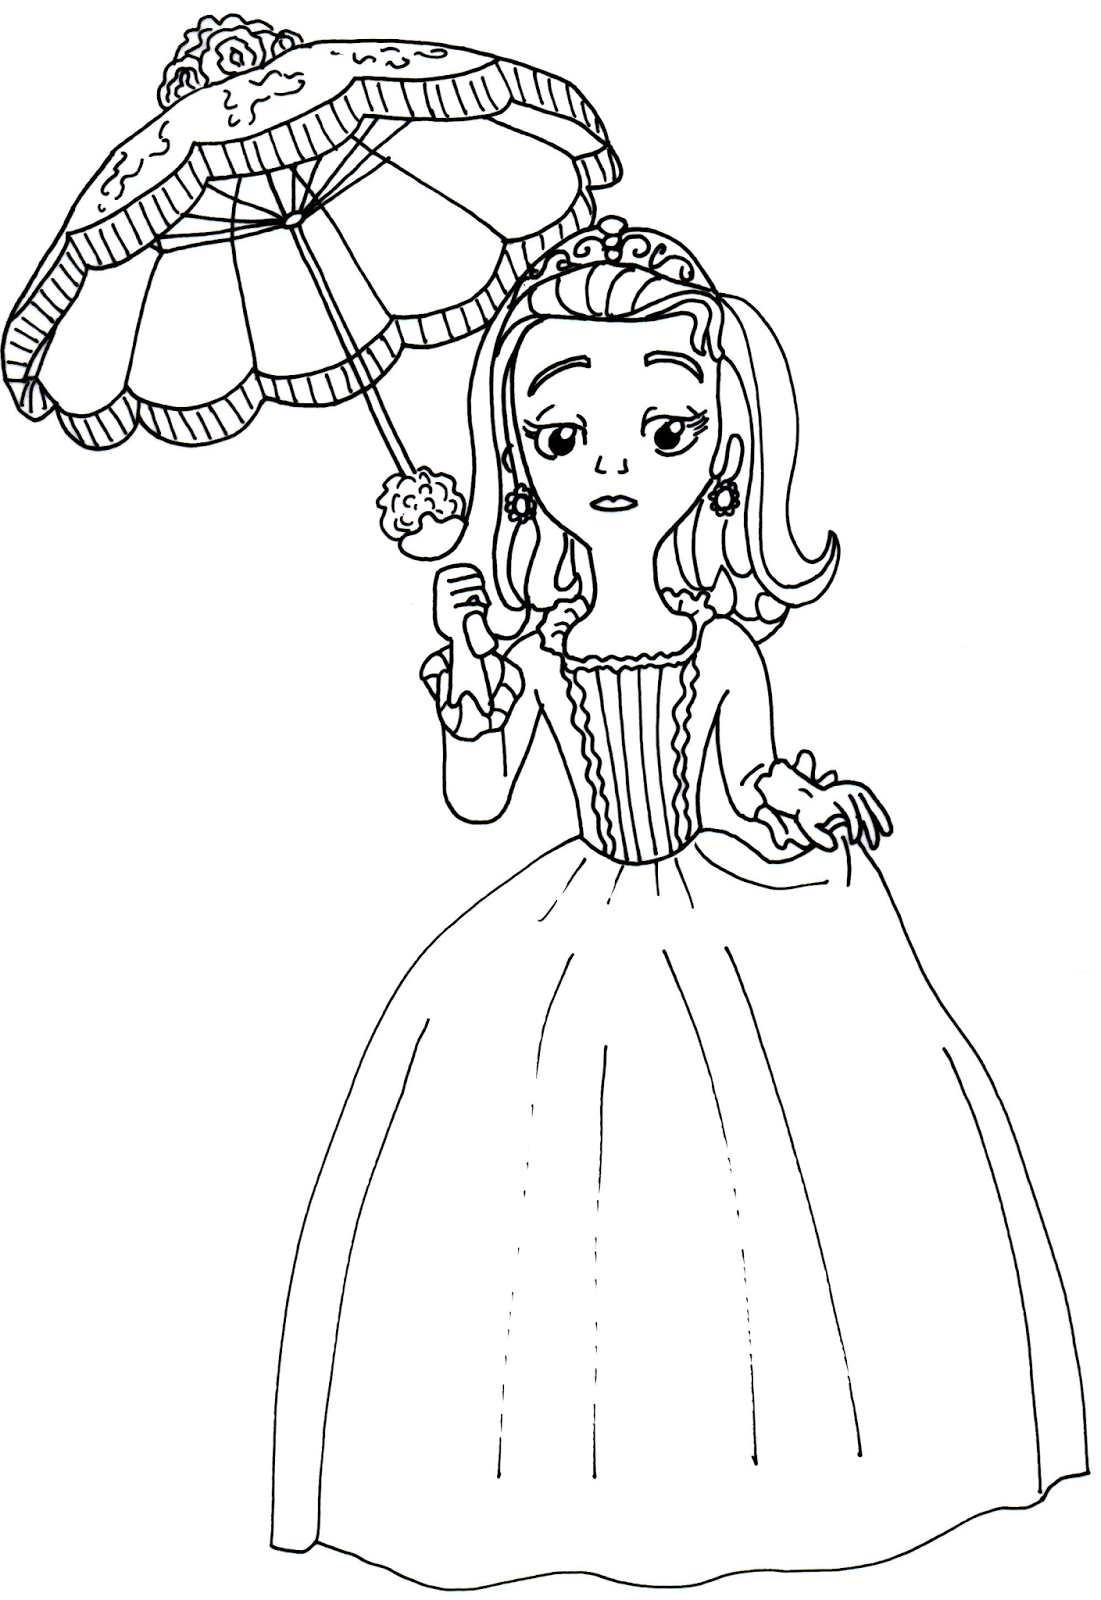 Sofia The First Coloring Pages: Amber Coloring Page